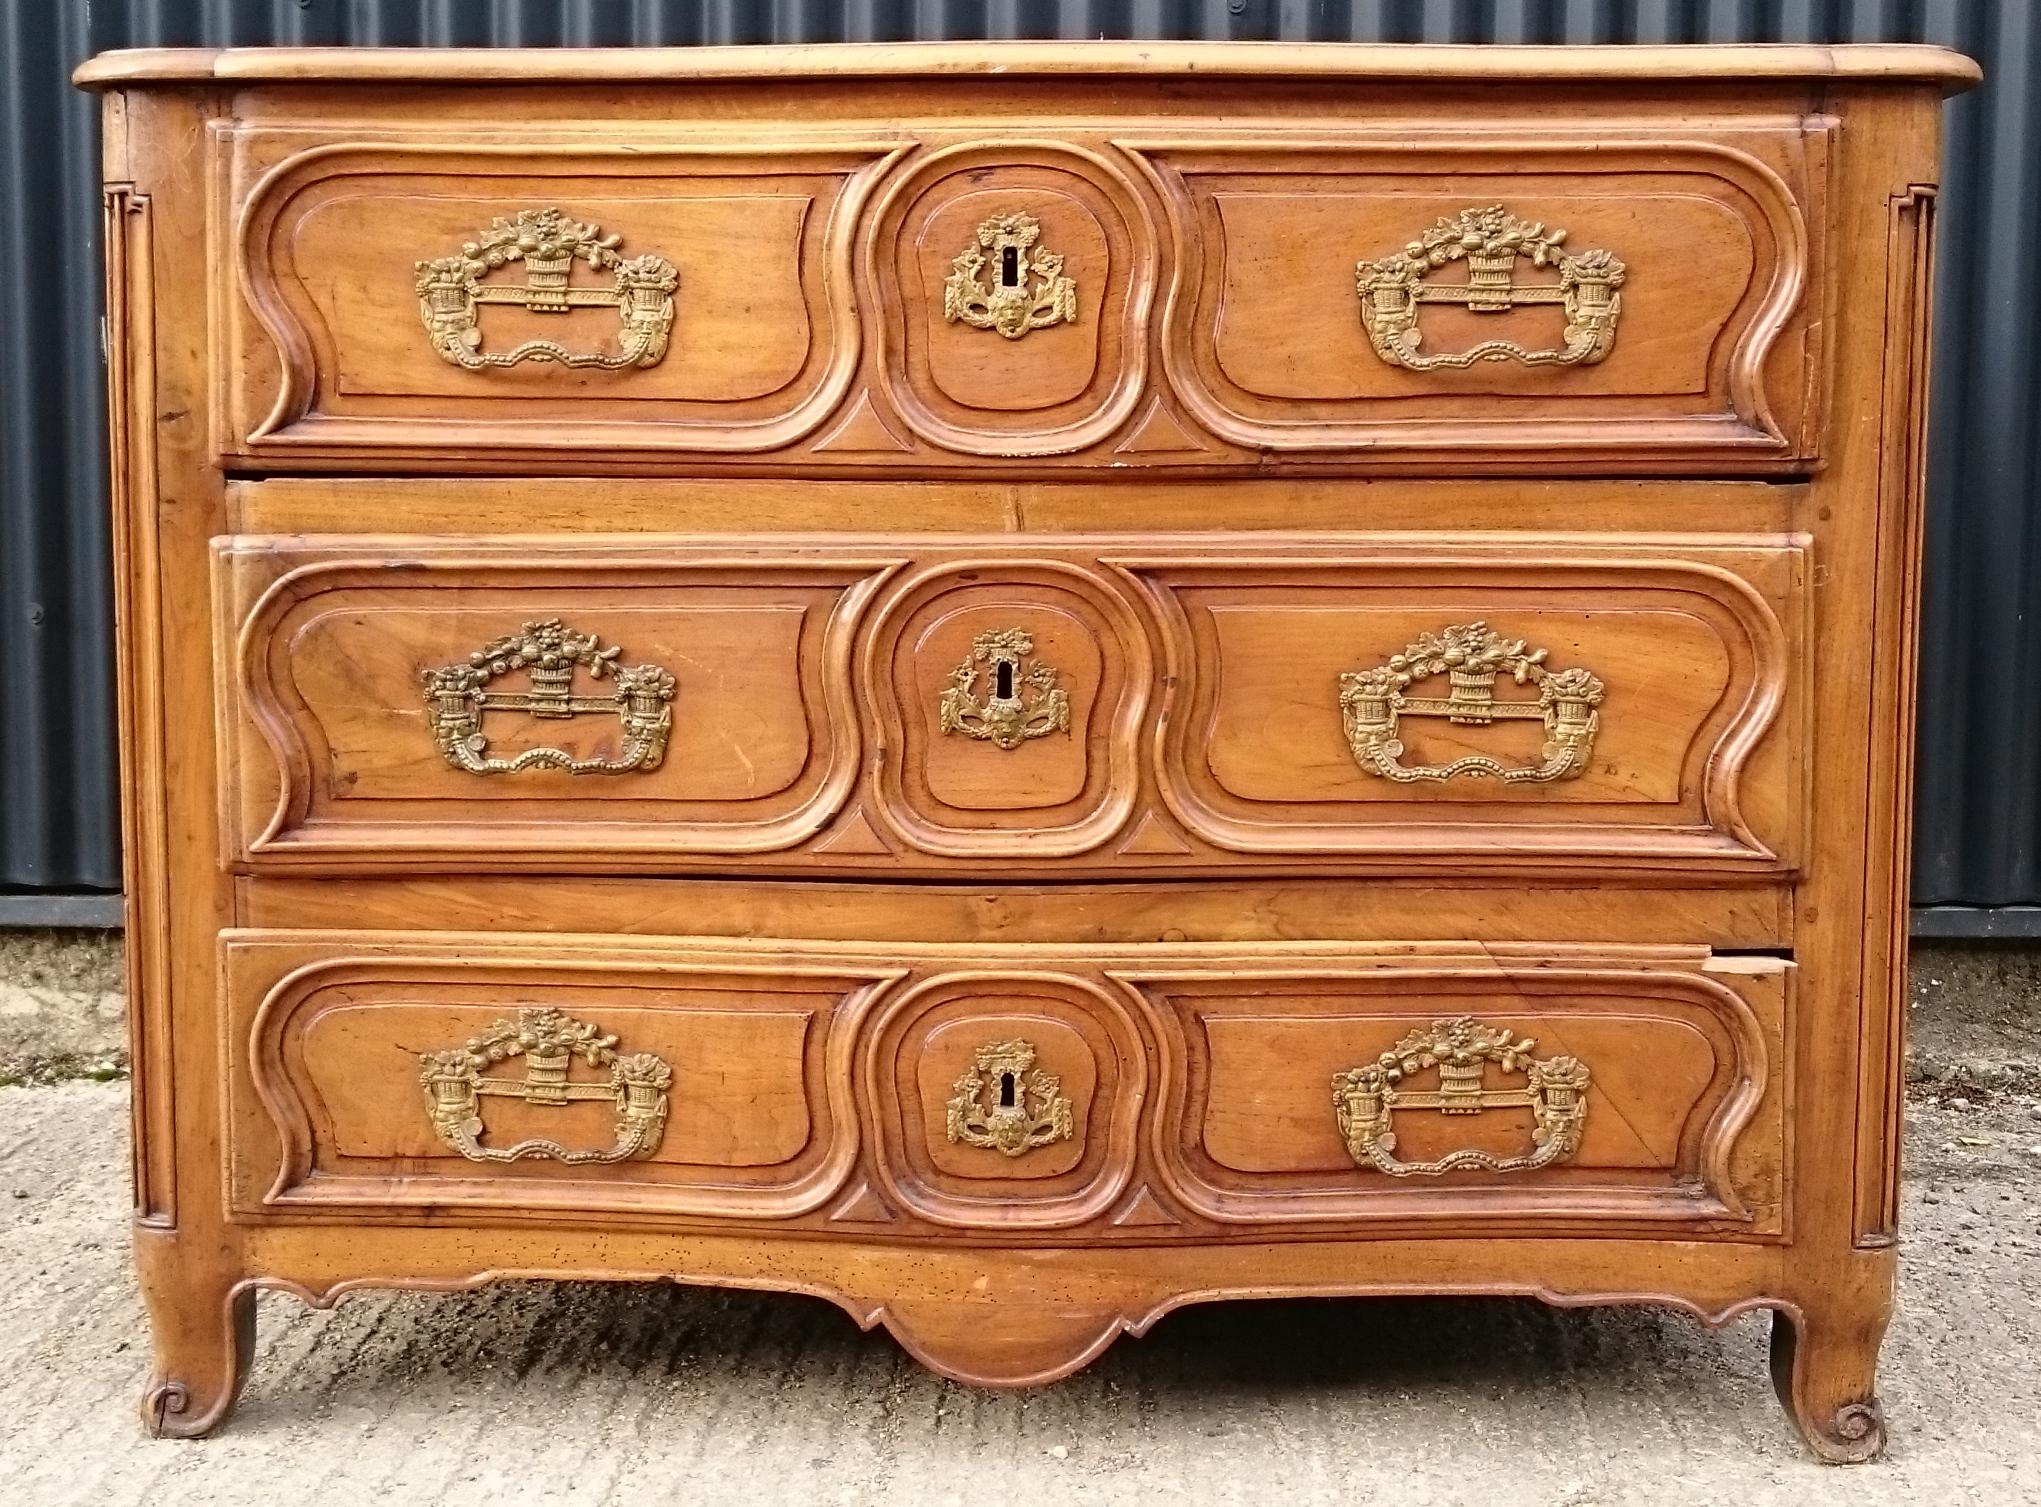 Early 19th century French antique commode chest with three drawers. This is a very decorative chest of drawers typical of the period, with carved serpentine front, lovely big brasswork handles and escutcheons and shapely outsplayed feet.
The timber